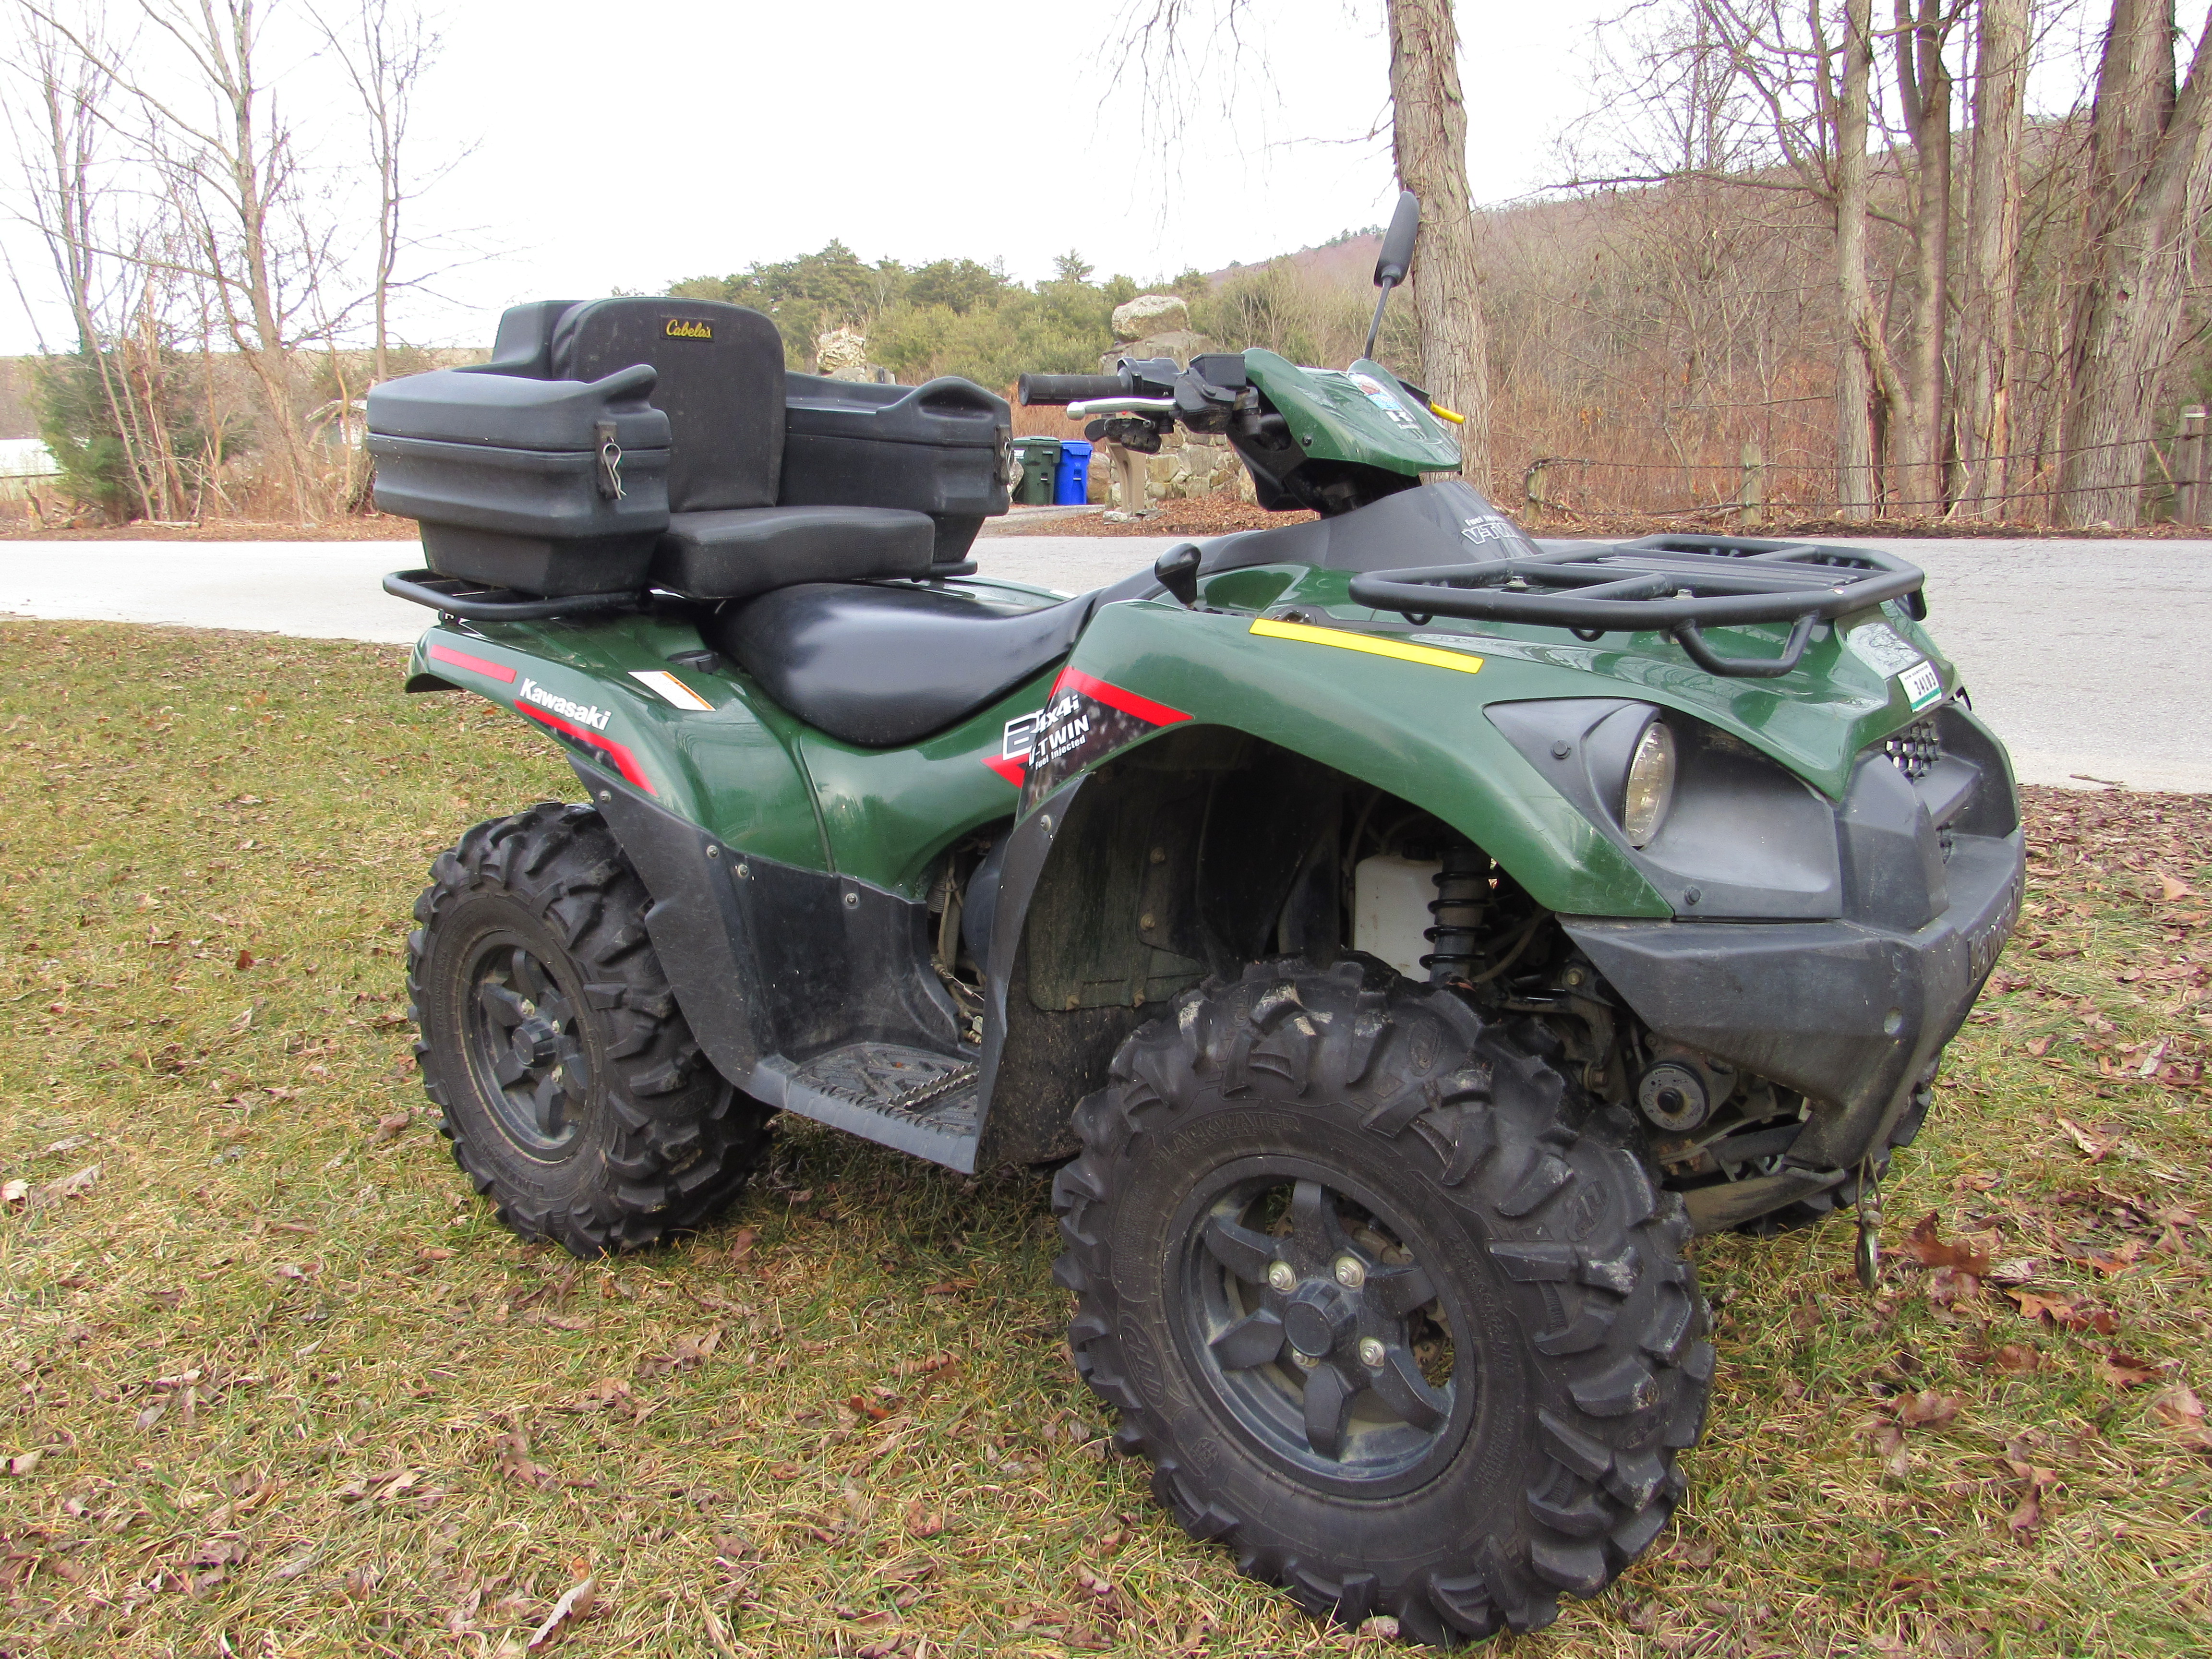 2019 BRUTEFORE 750 4X4I. WITH WINCH BRUTEFORE 750 4X4I. WITH WINCH 7803 - Click for larger photo